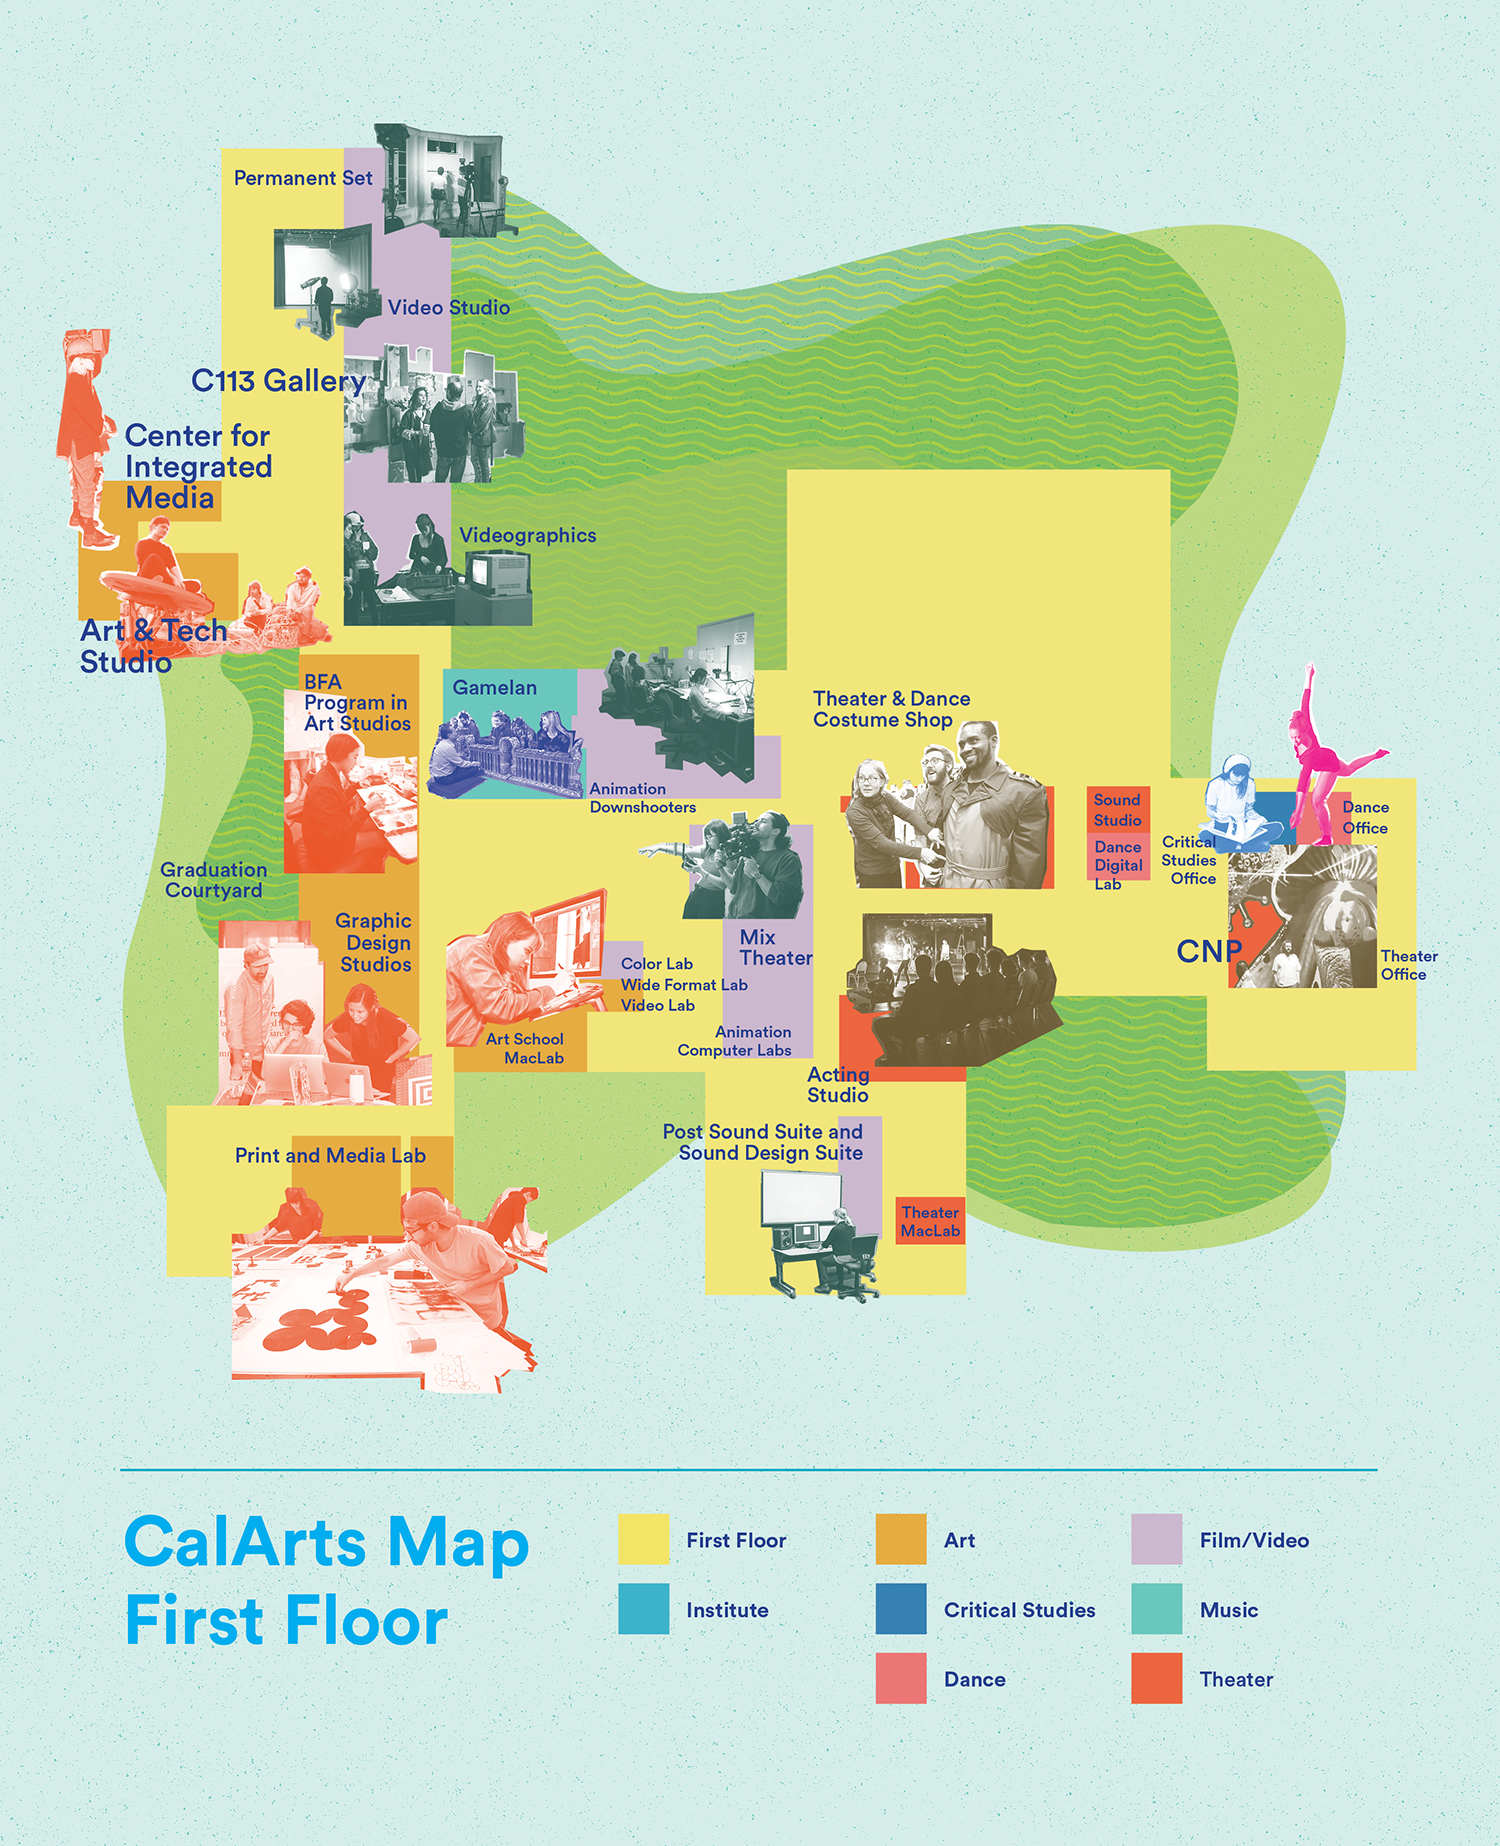 Map of the CalArts First Floor